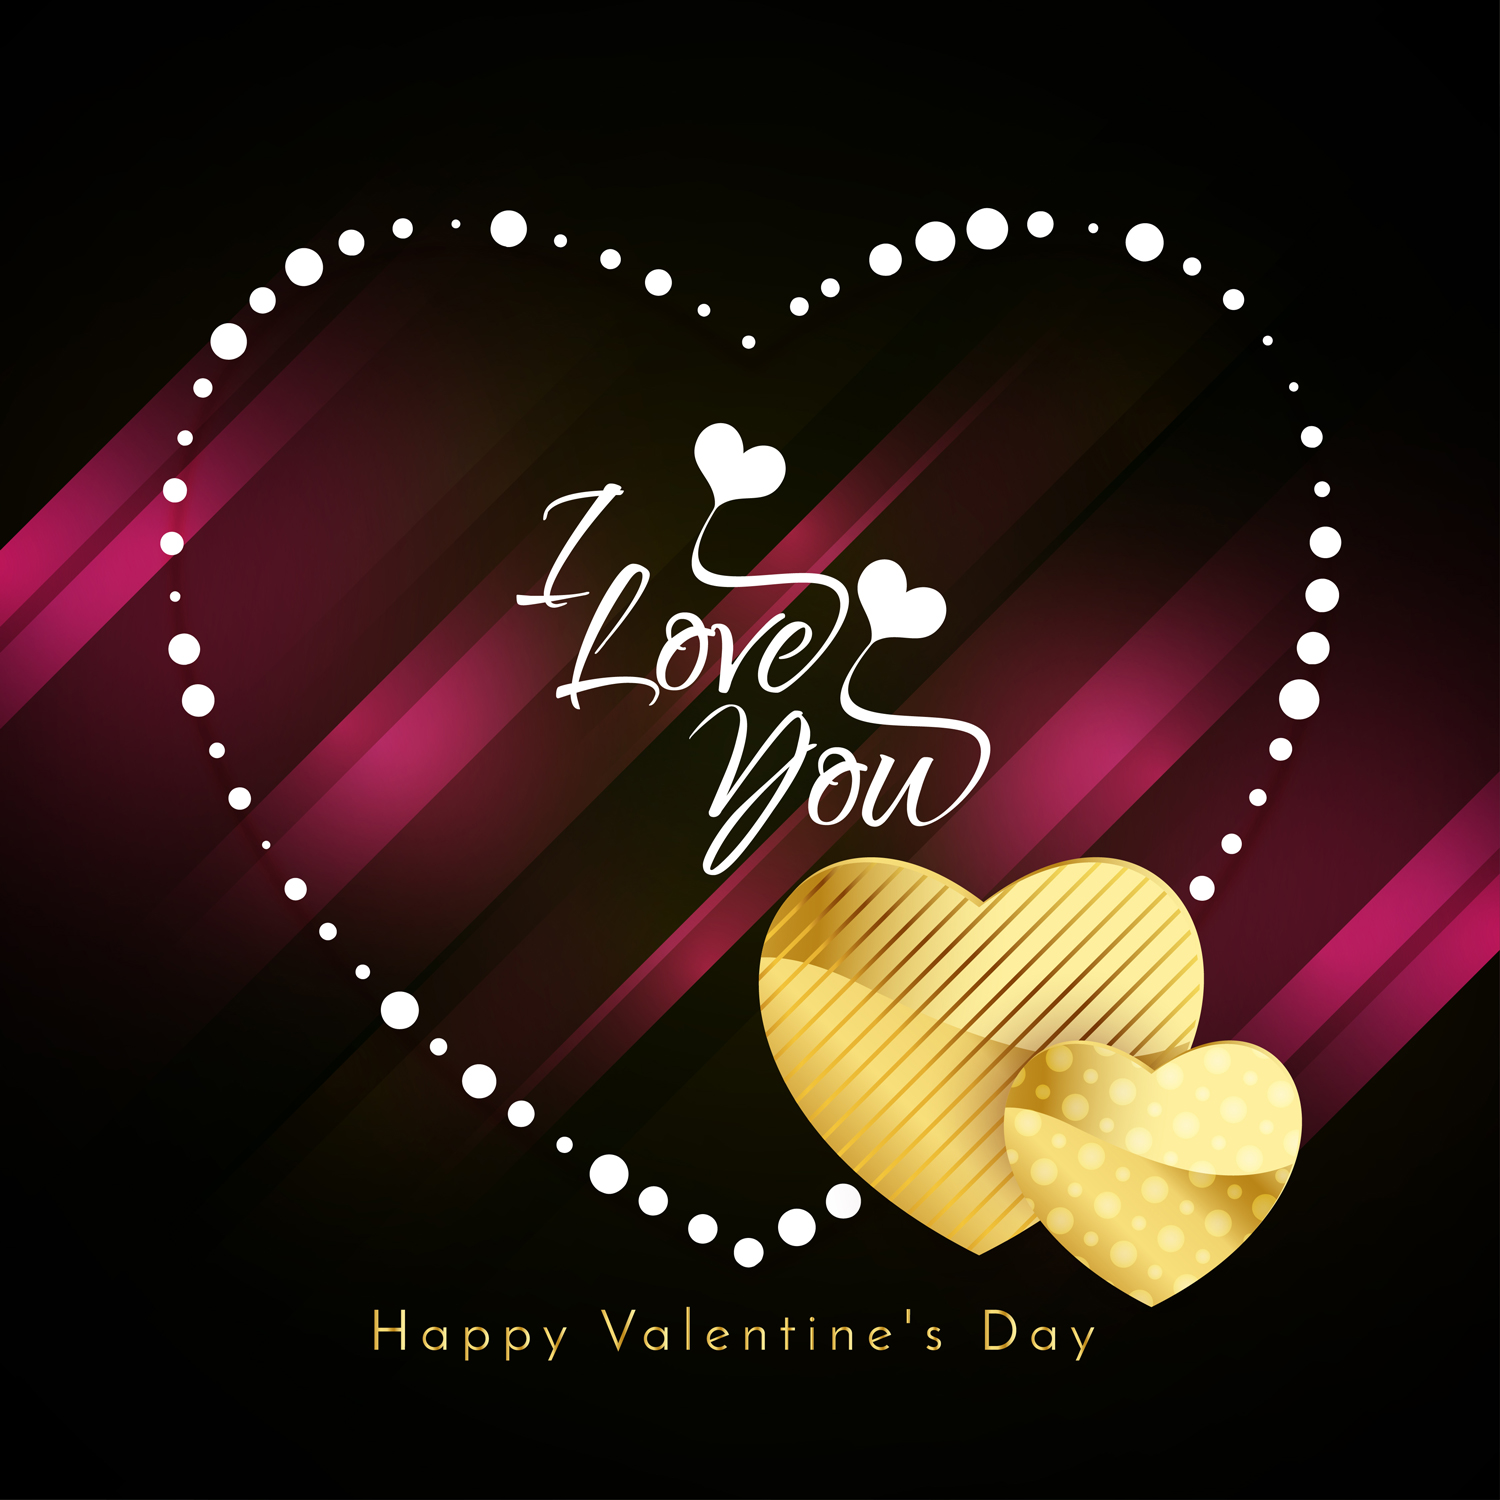 Romantic Greetings – Happy Valentine’s Day gift card